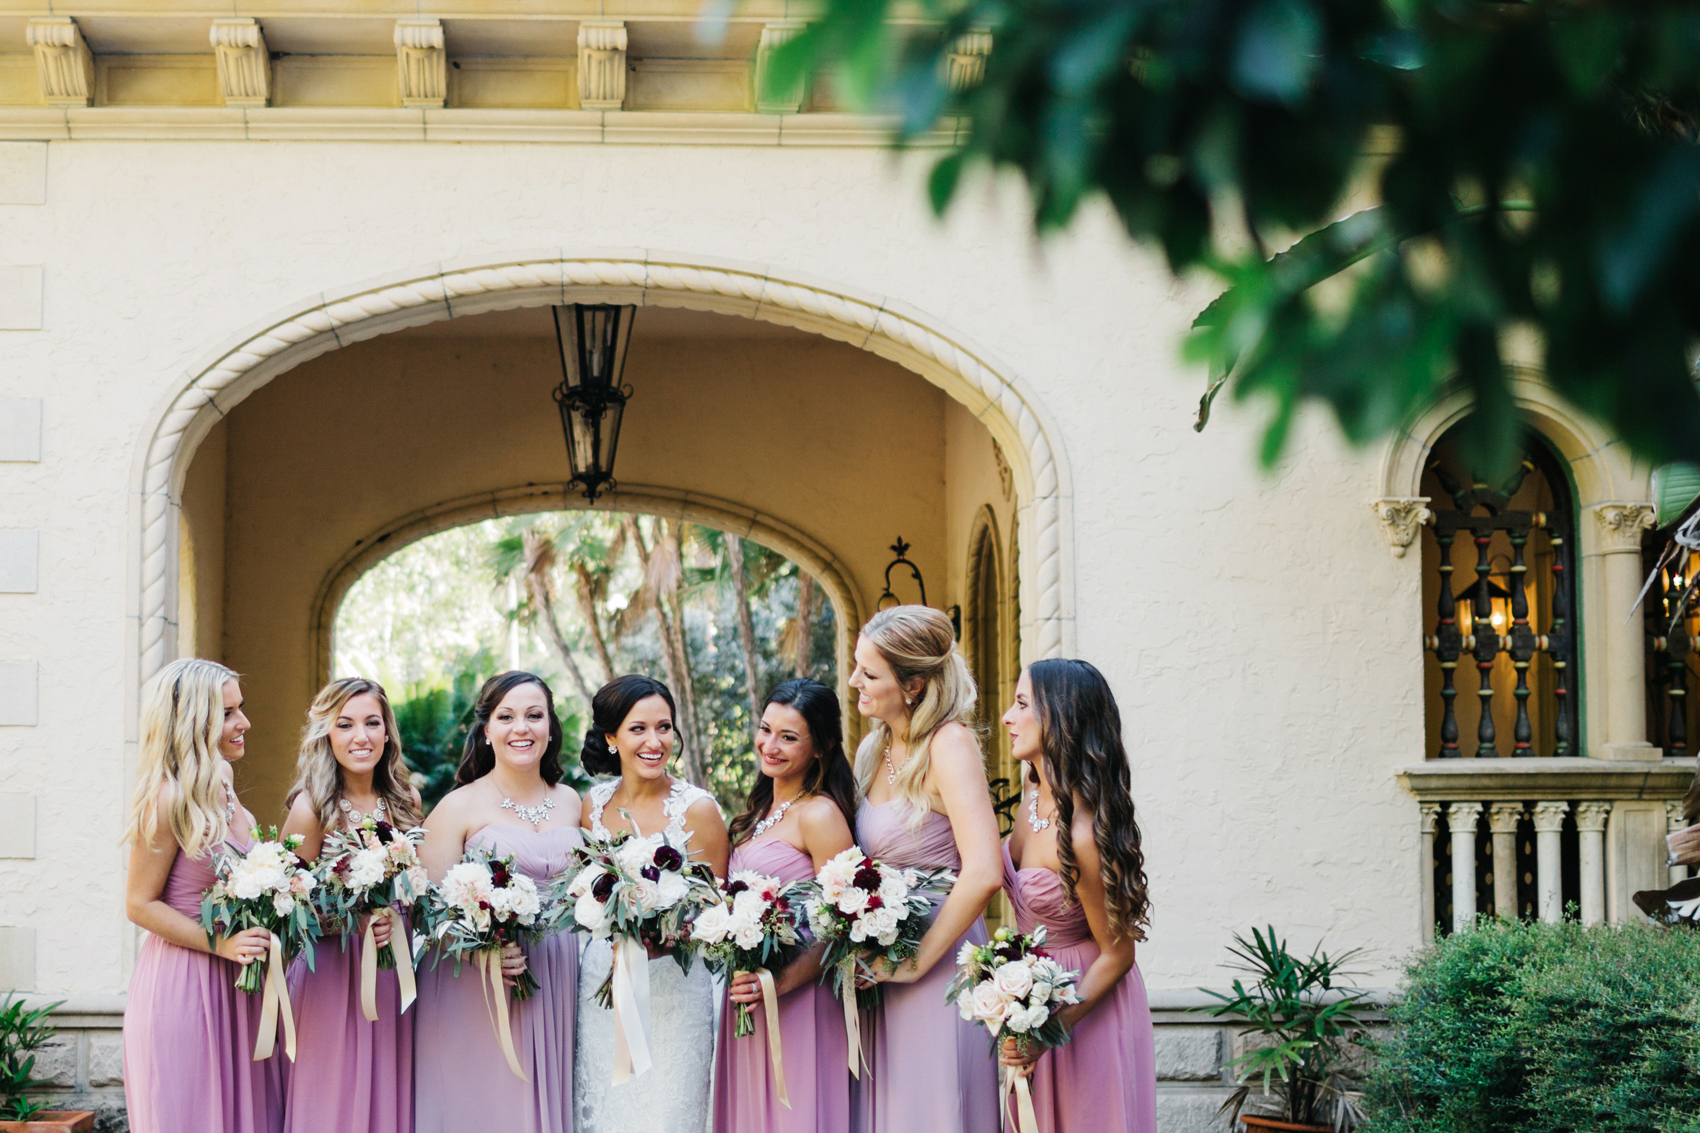 Candid photo of the bride laughing with her bridesmaids